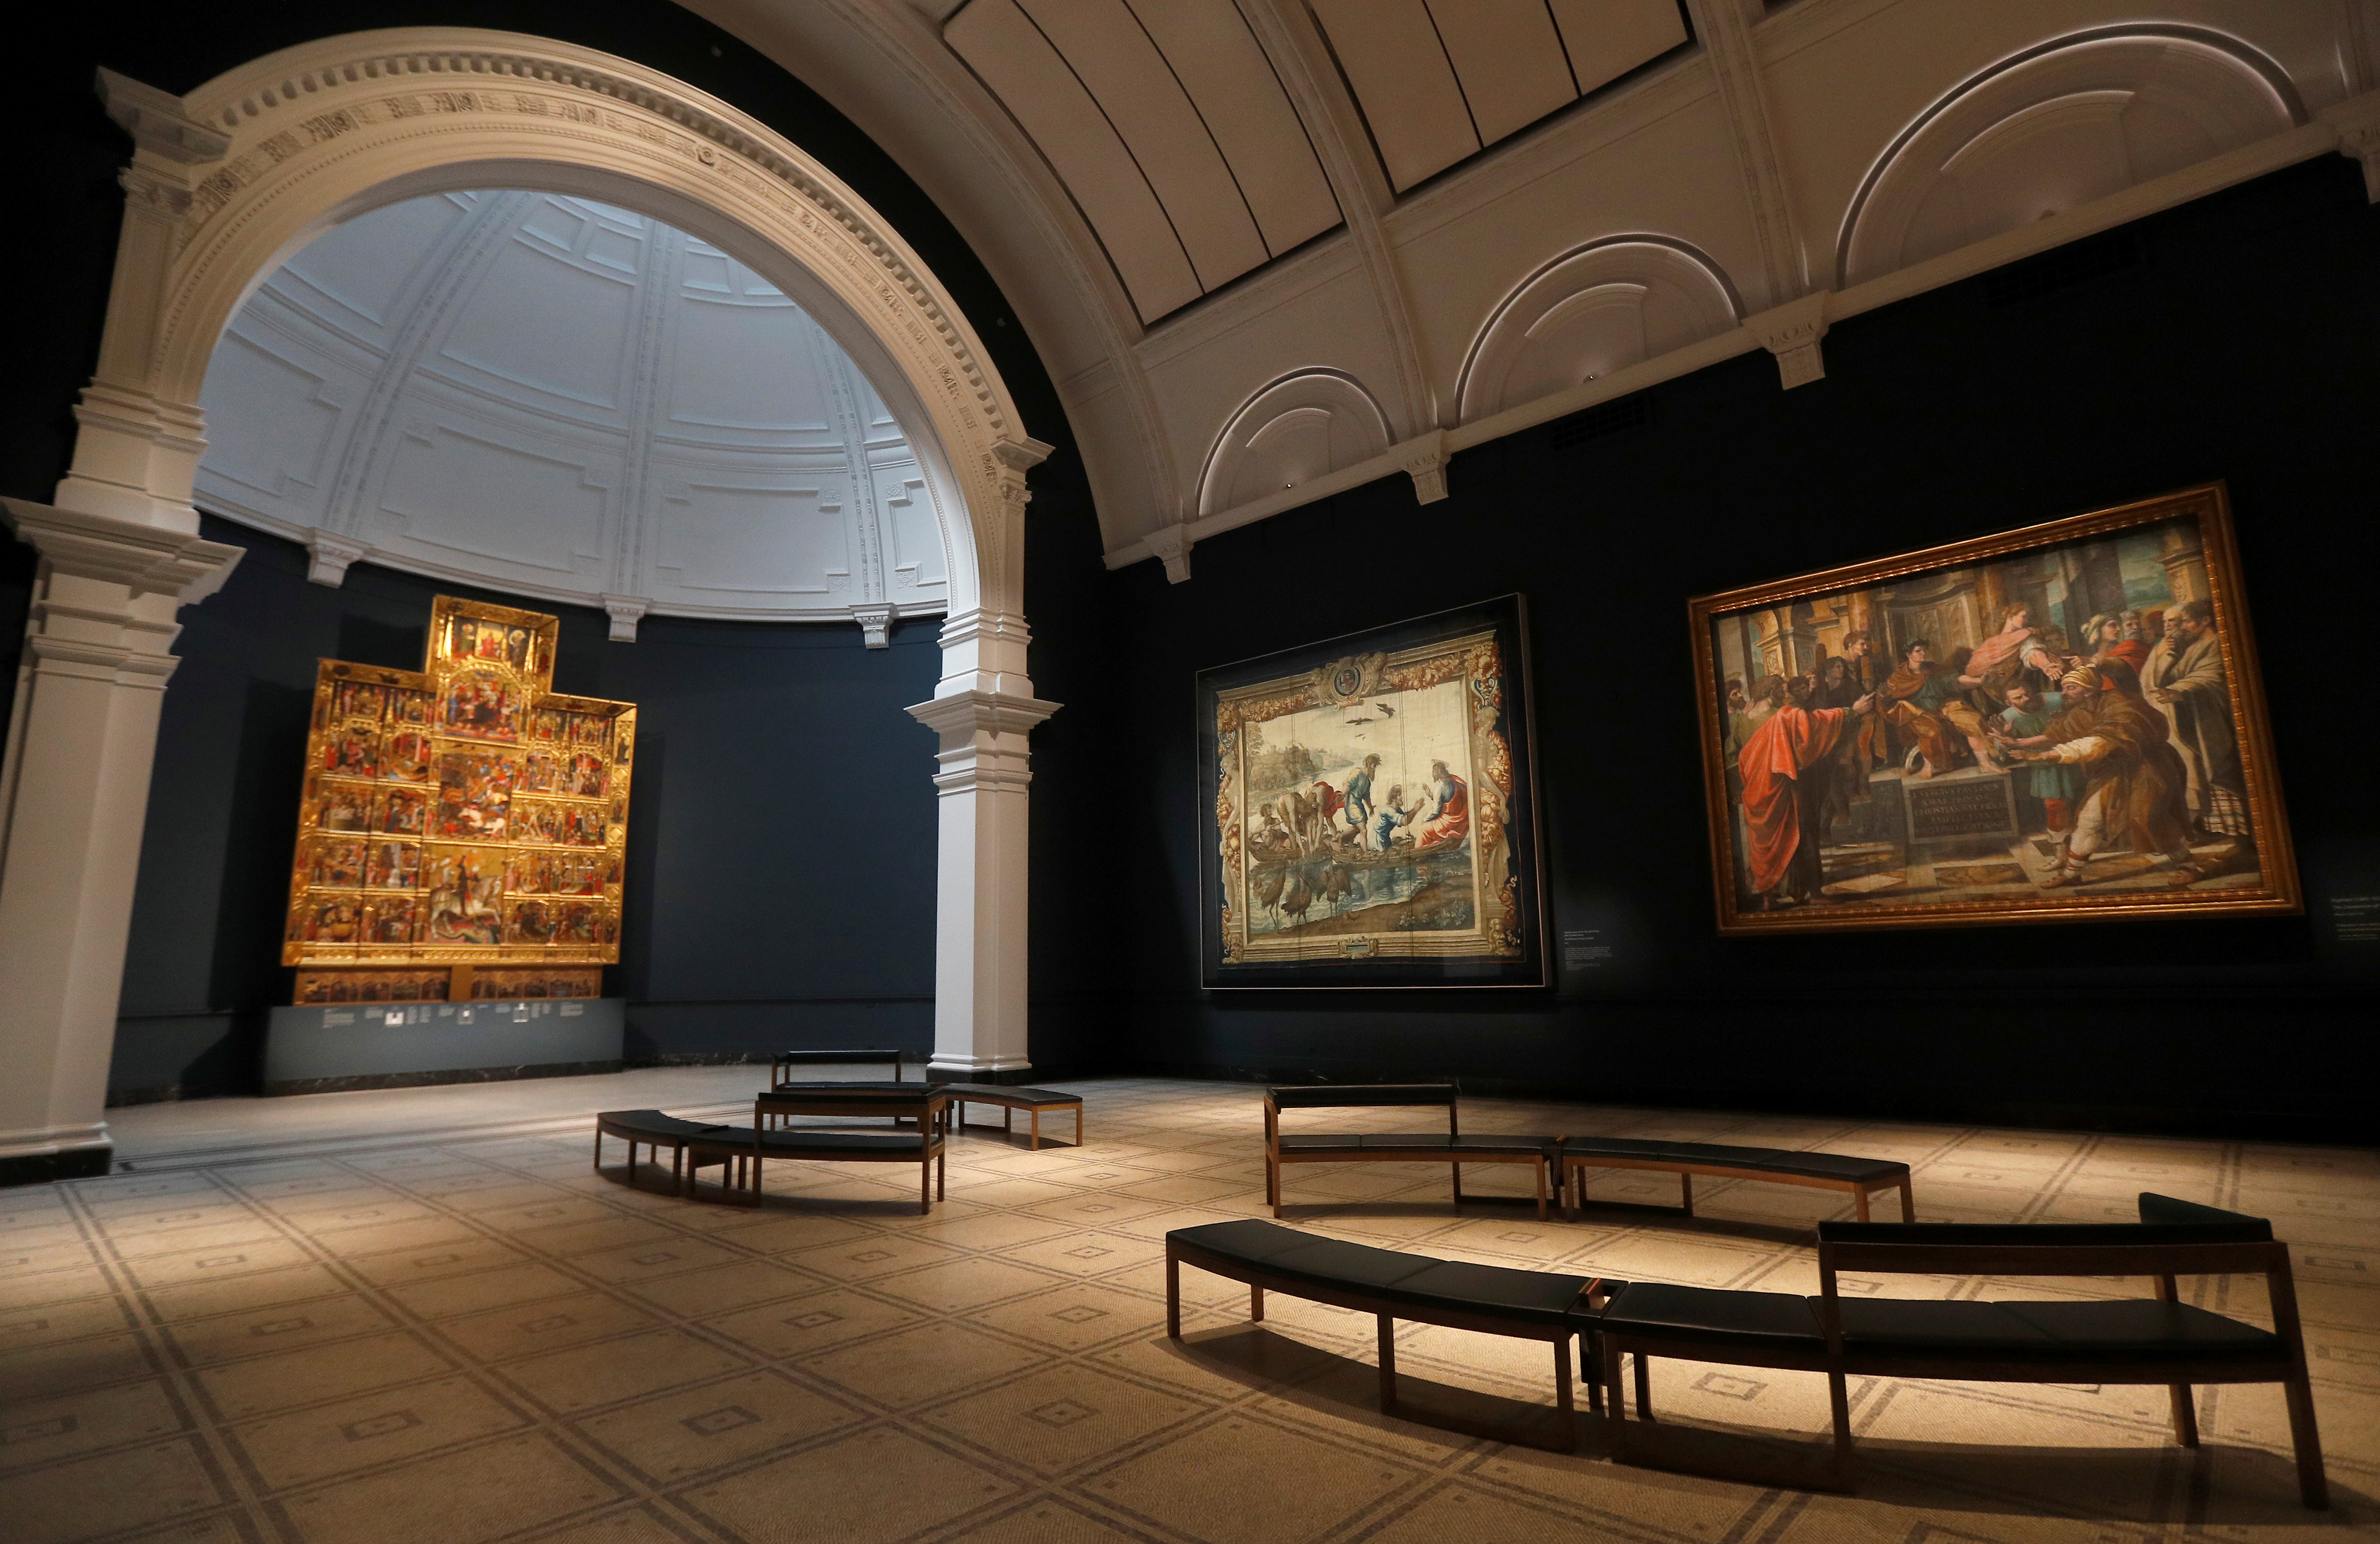 Newly refurbished Rafael Court at Victoria and Albert Museum in London